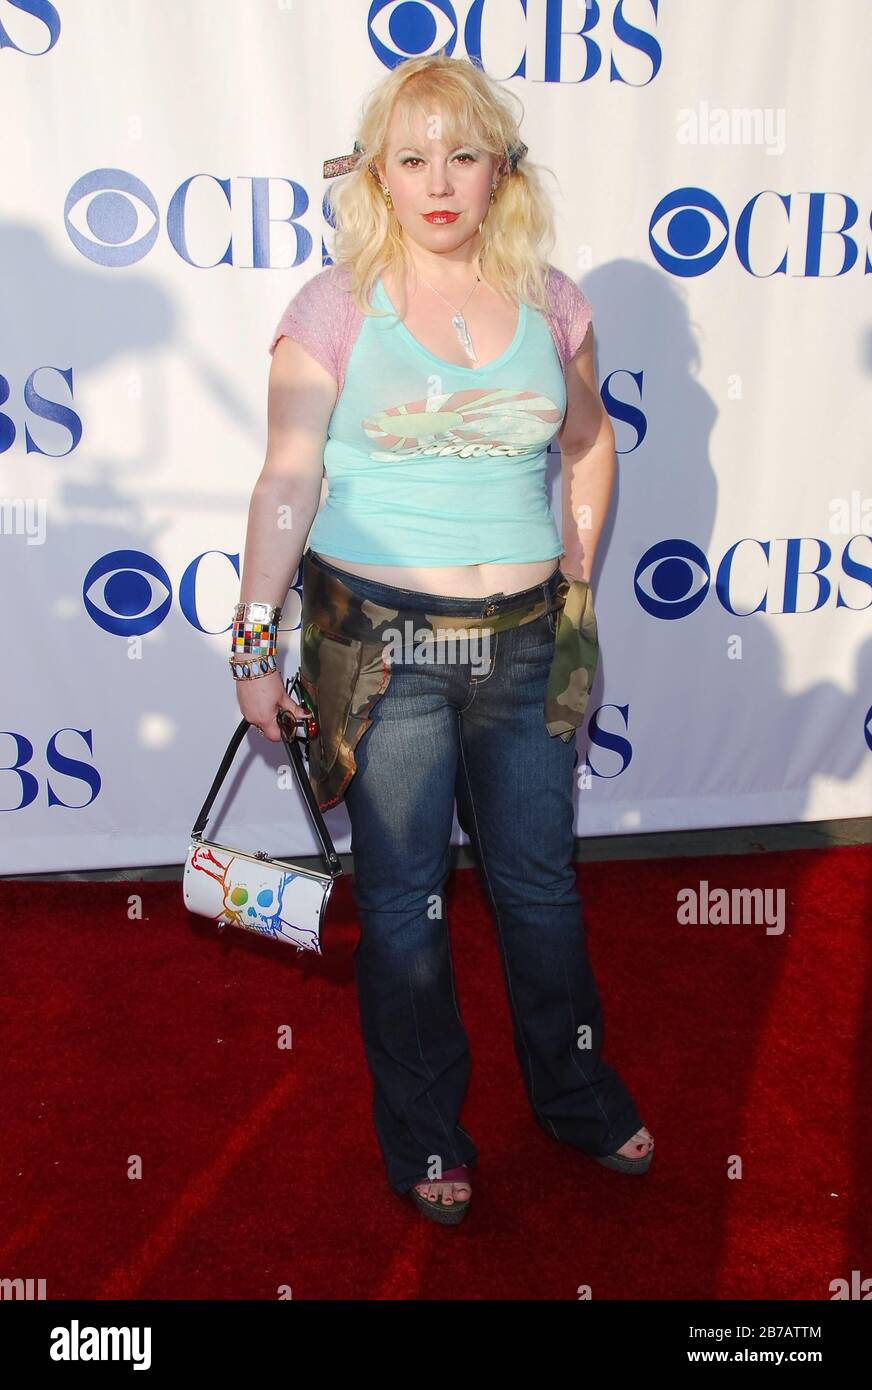 Kirsten Vangsness at the CBS 2006 TCA Summer Press Tour Stars Party held at the The Rose Bowl in Pasadena, CA. The event took place on Saturday, July 15, 2006.  Photo by: SBM / PictureLux Stock Photo